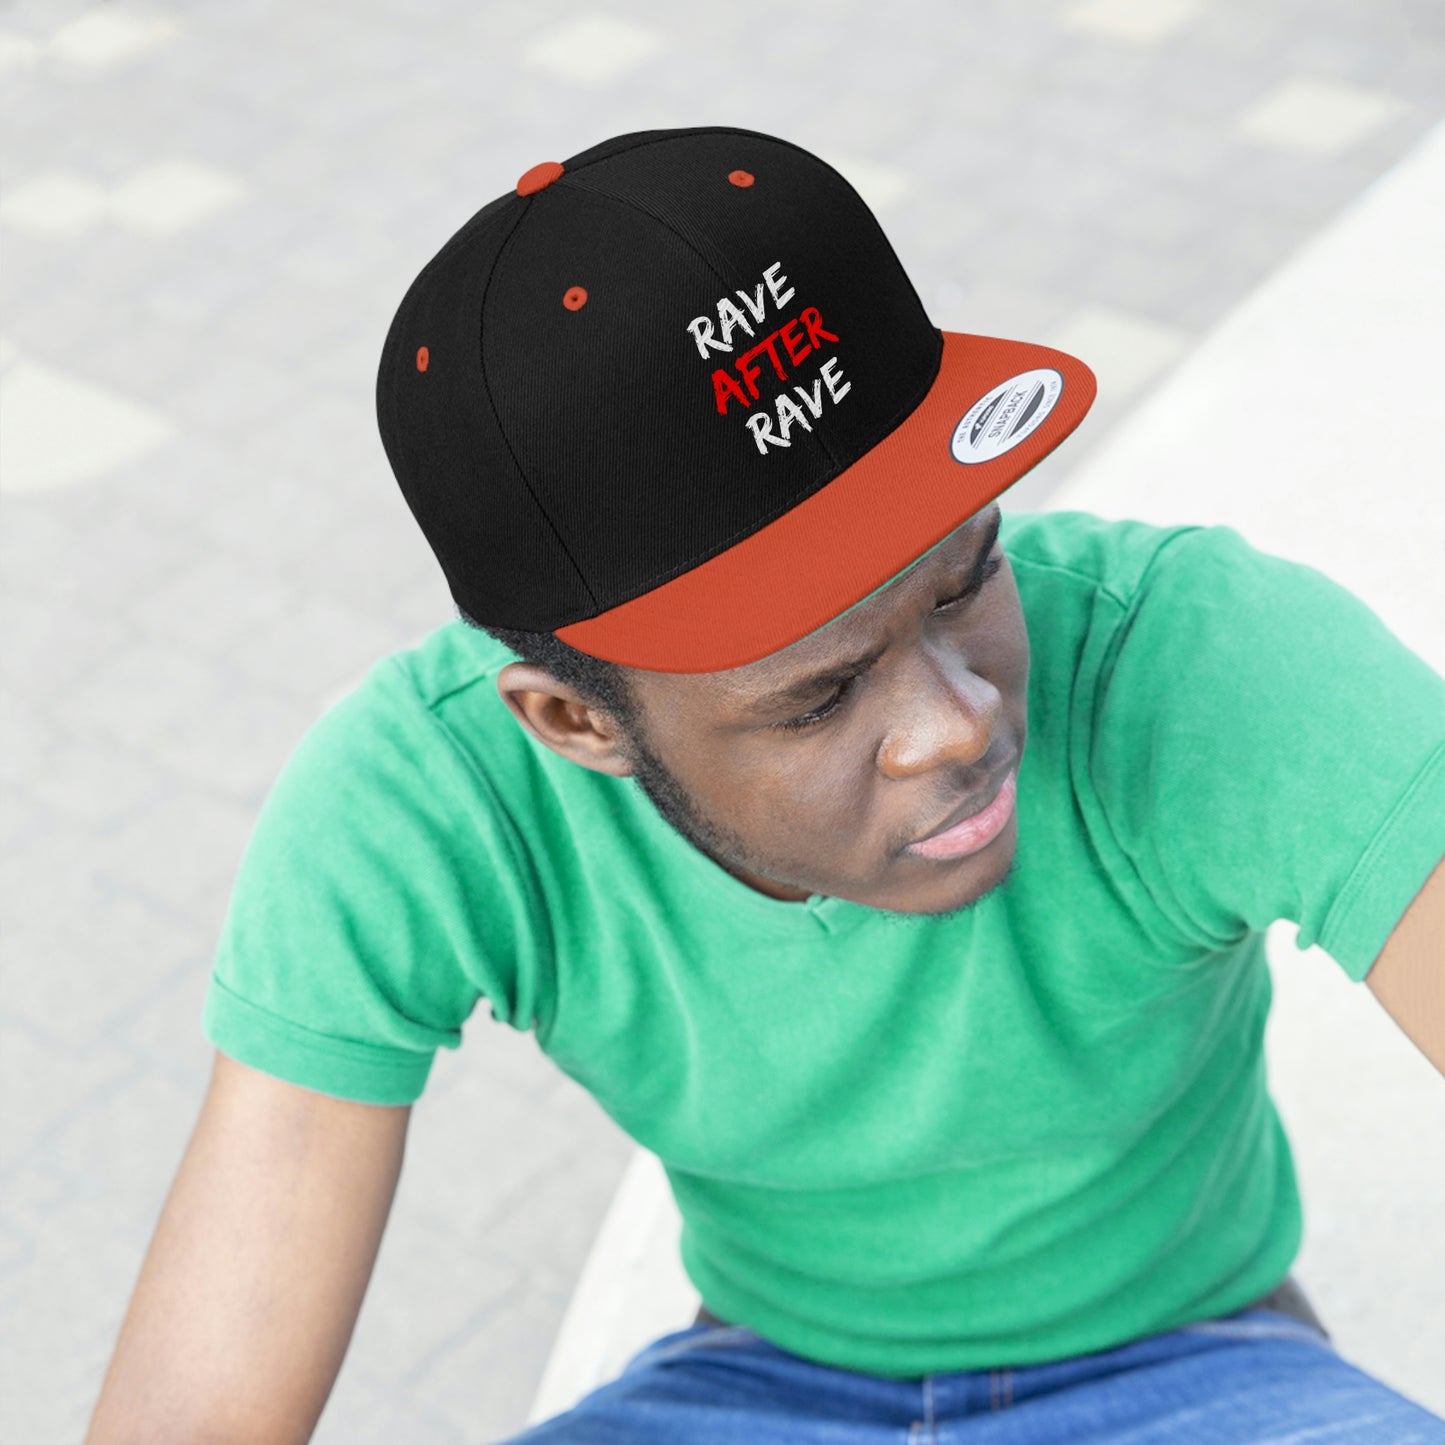 Rave after Rave - Embroidery Logo - Unisex Hat